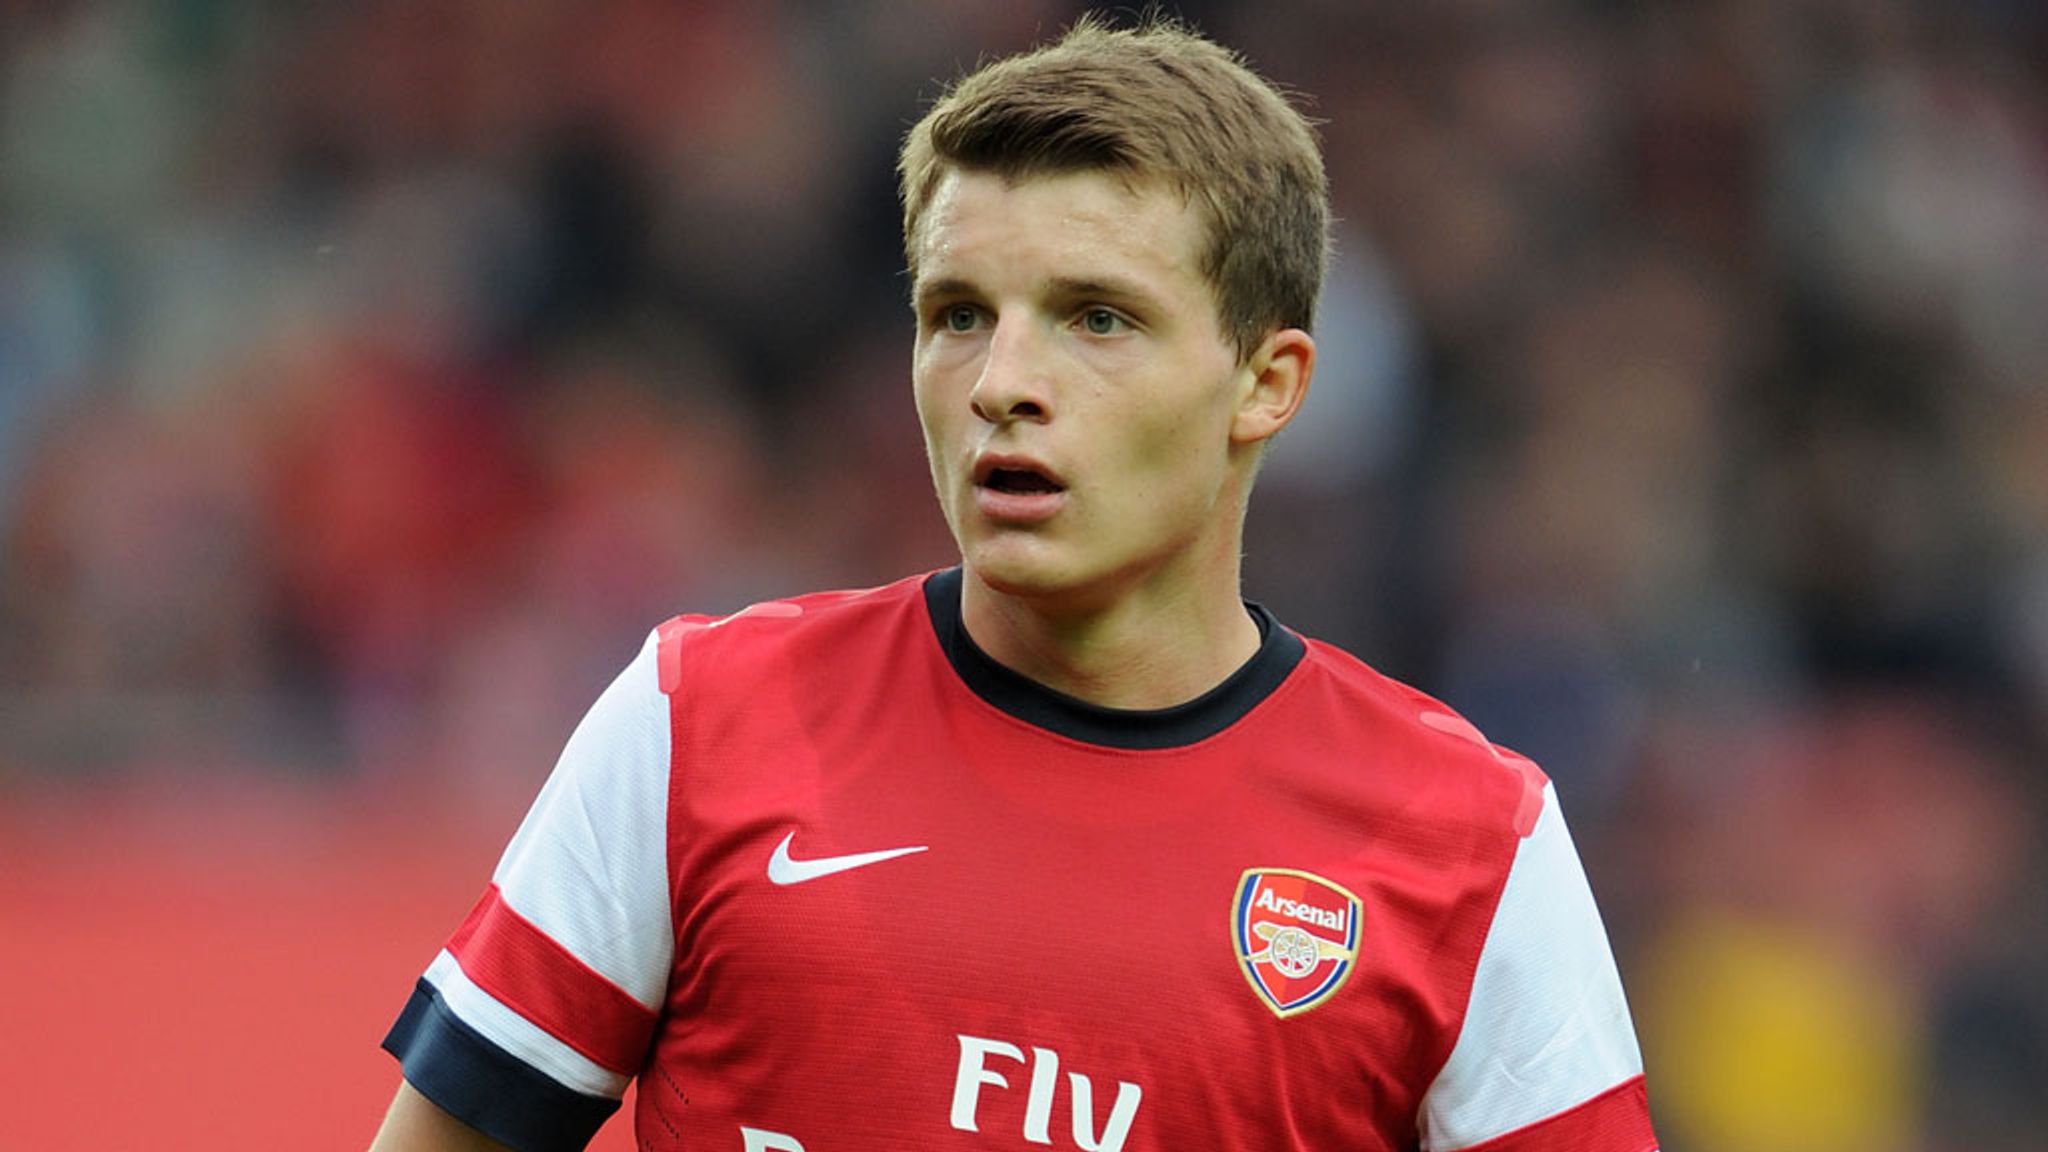 Arsenal teenager Thomas Eisfeld is pleased with his progress at the club | Football News | Sky Sports